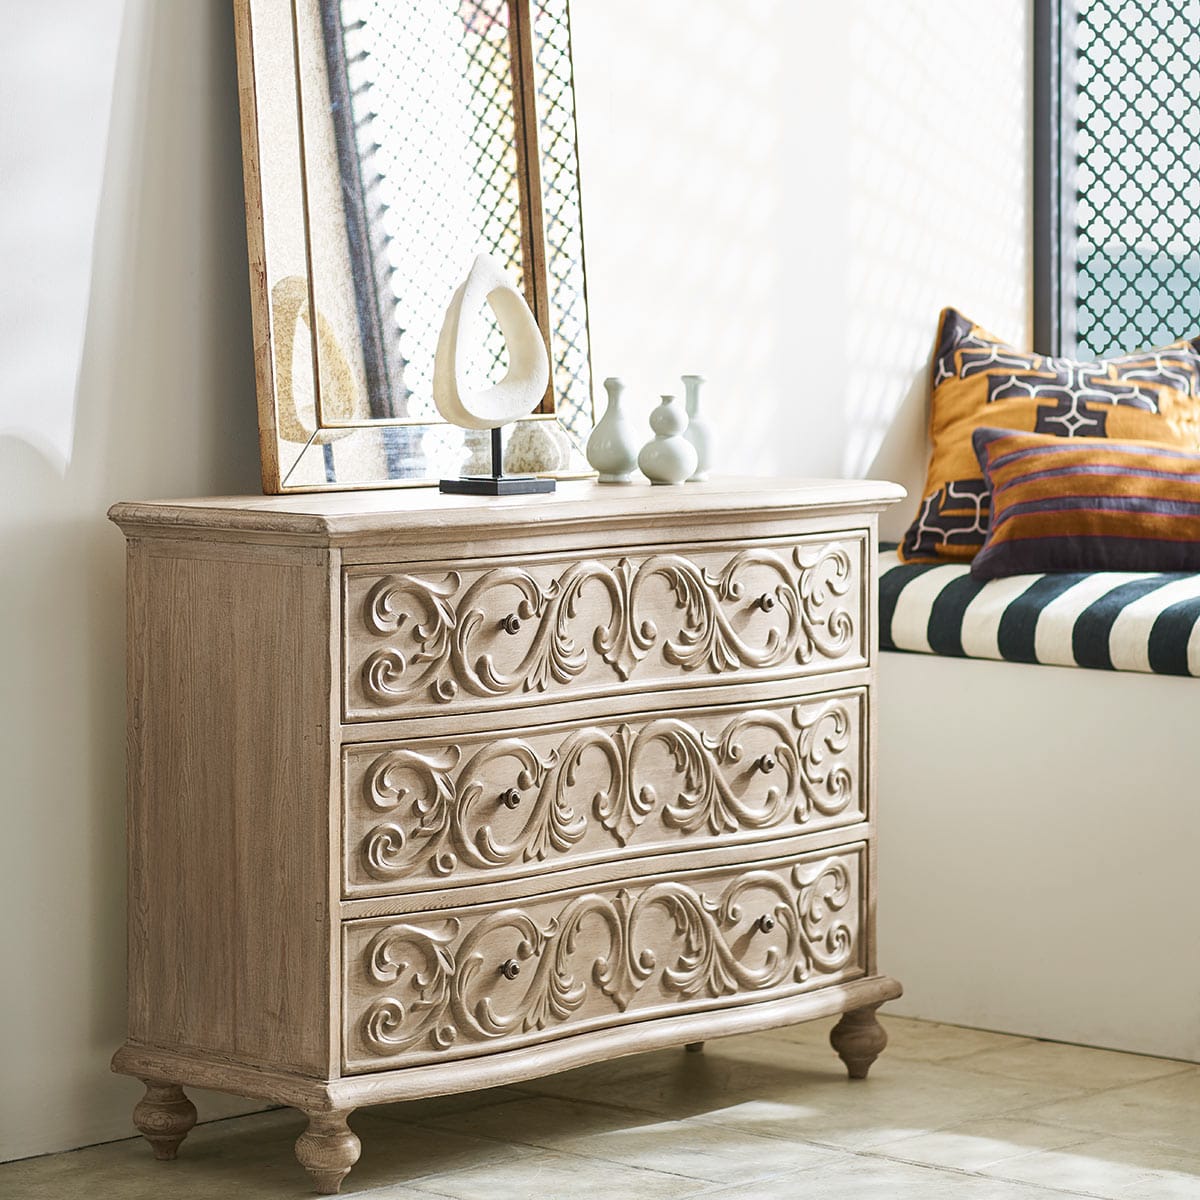 Stylish Storage Solutions; 10 of the Best Luxury Chests of Drawers